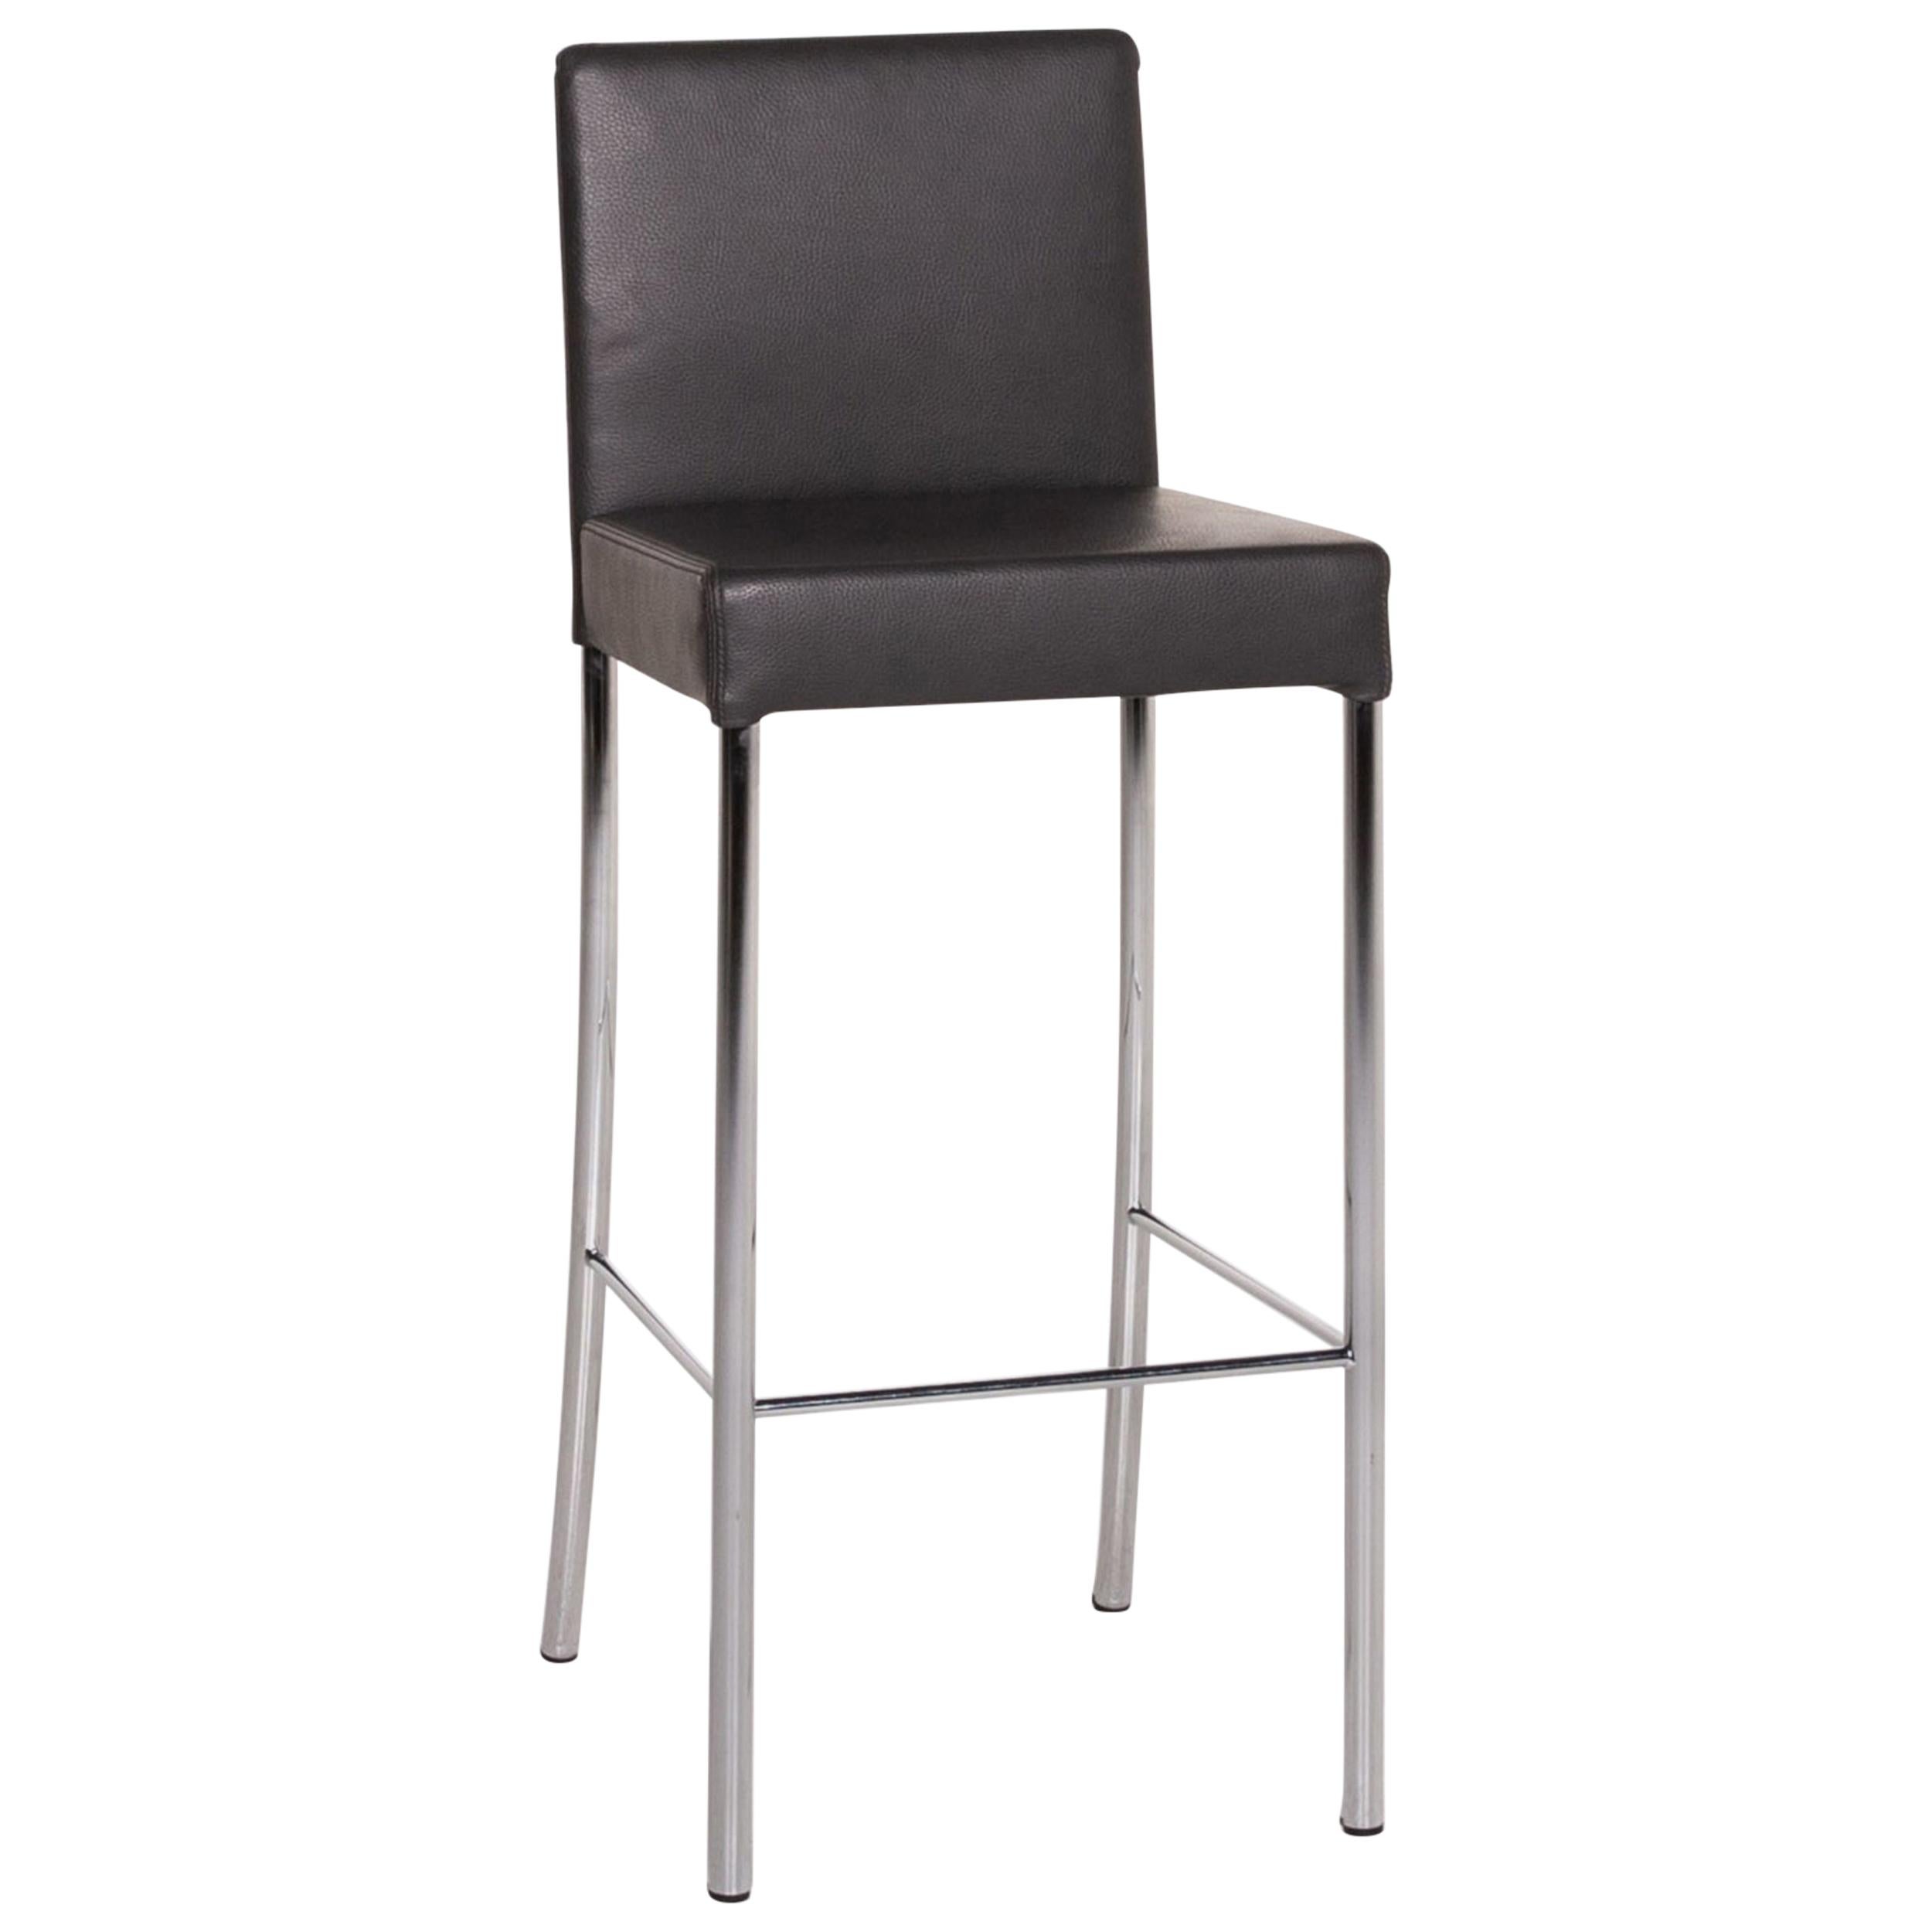 Walter Knoll Leather Bar Stool Anthracite Gray Chair For Sale